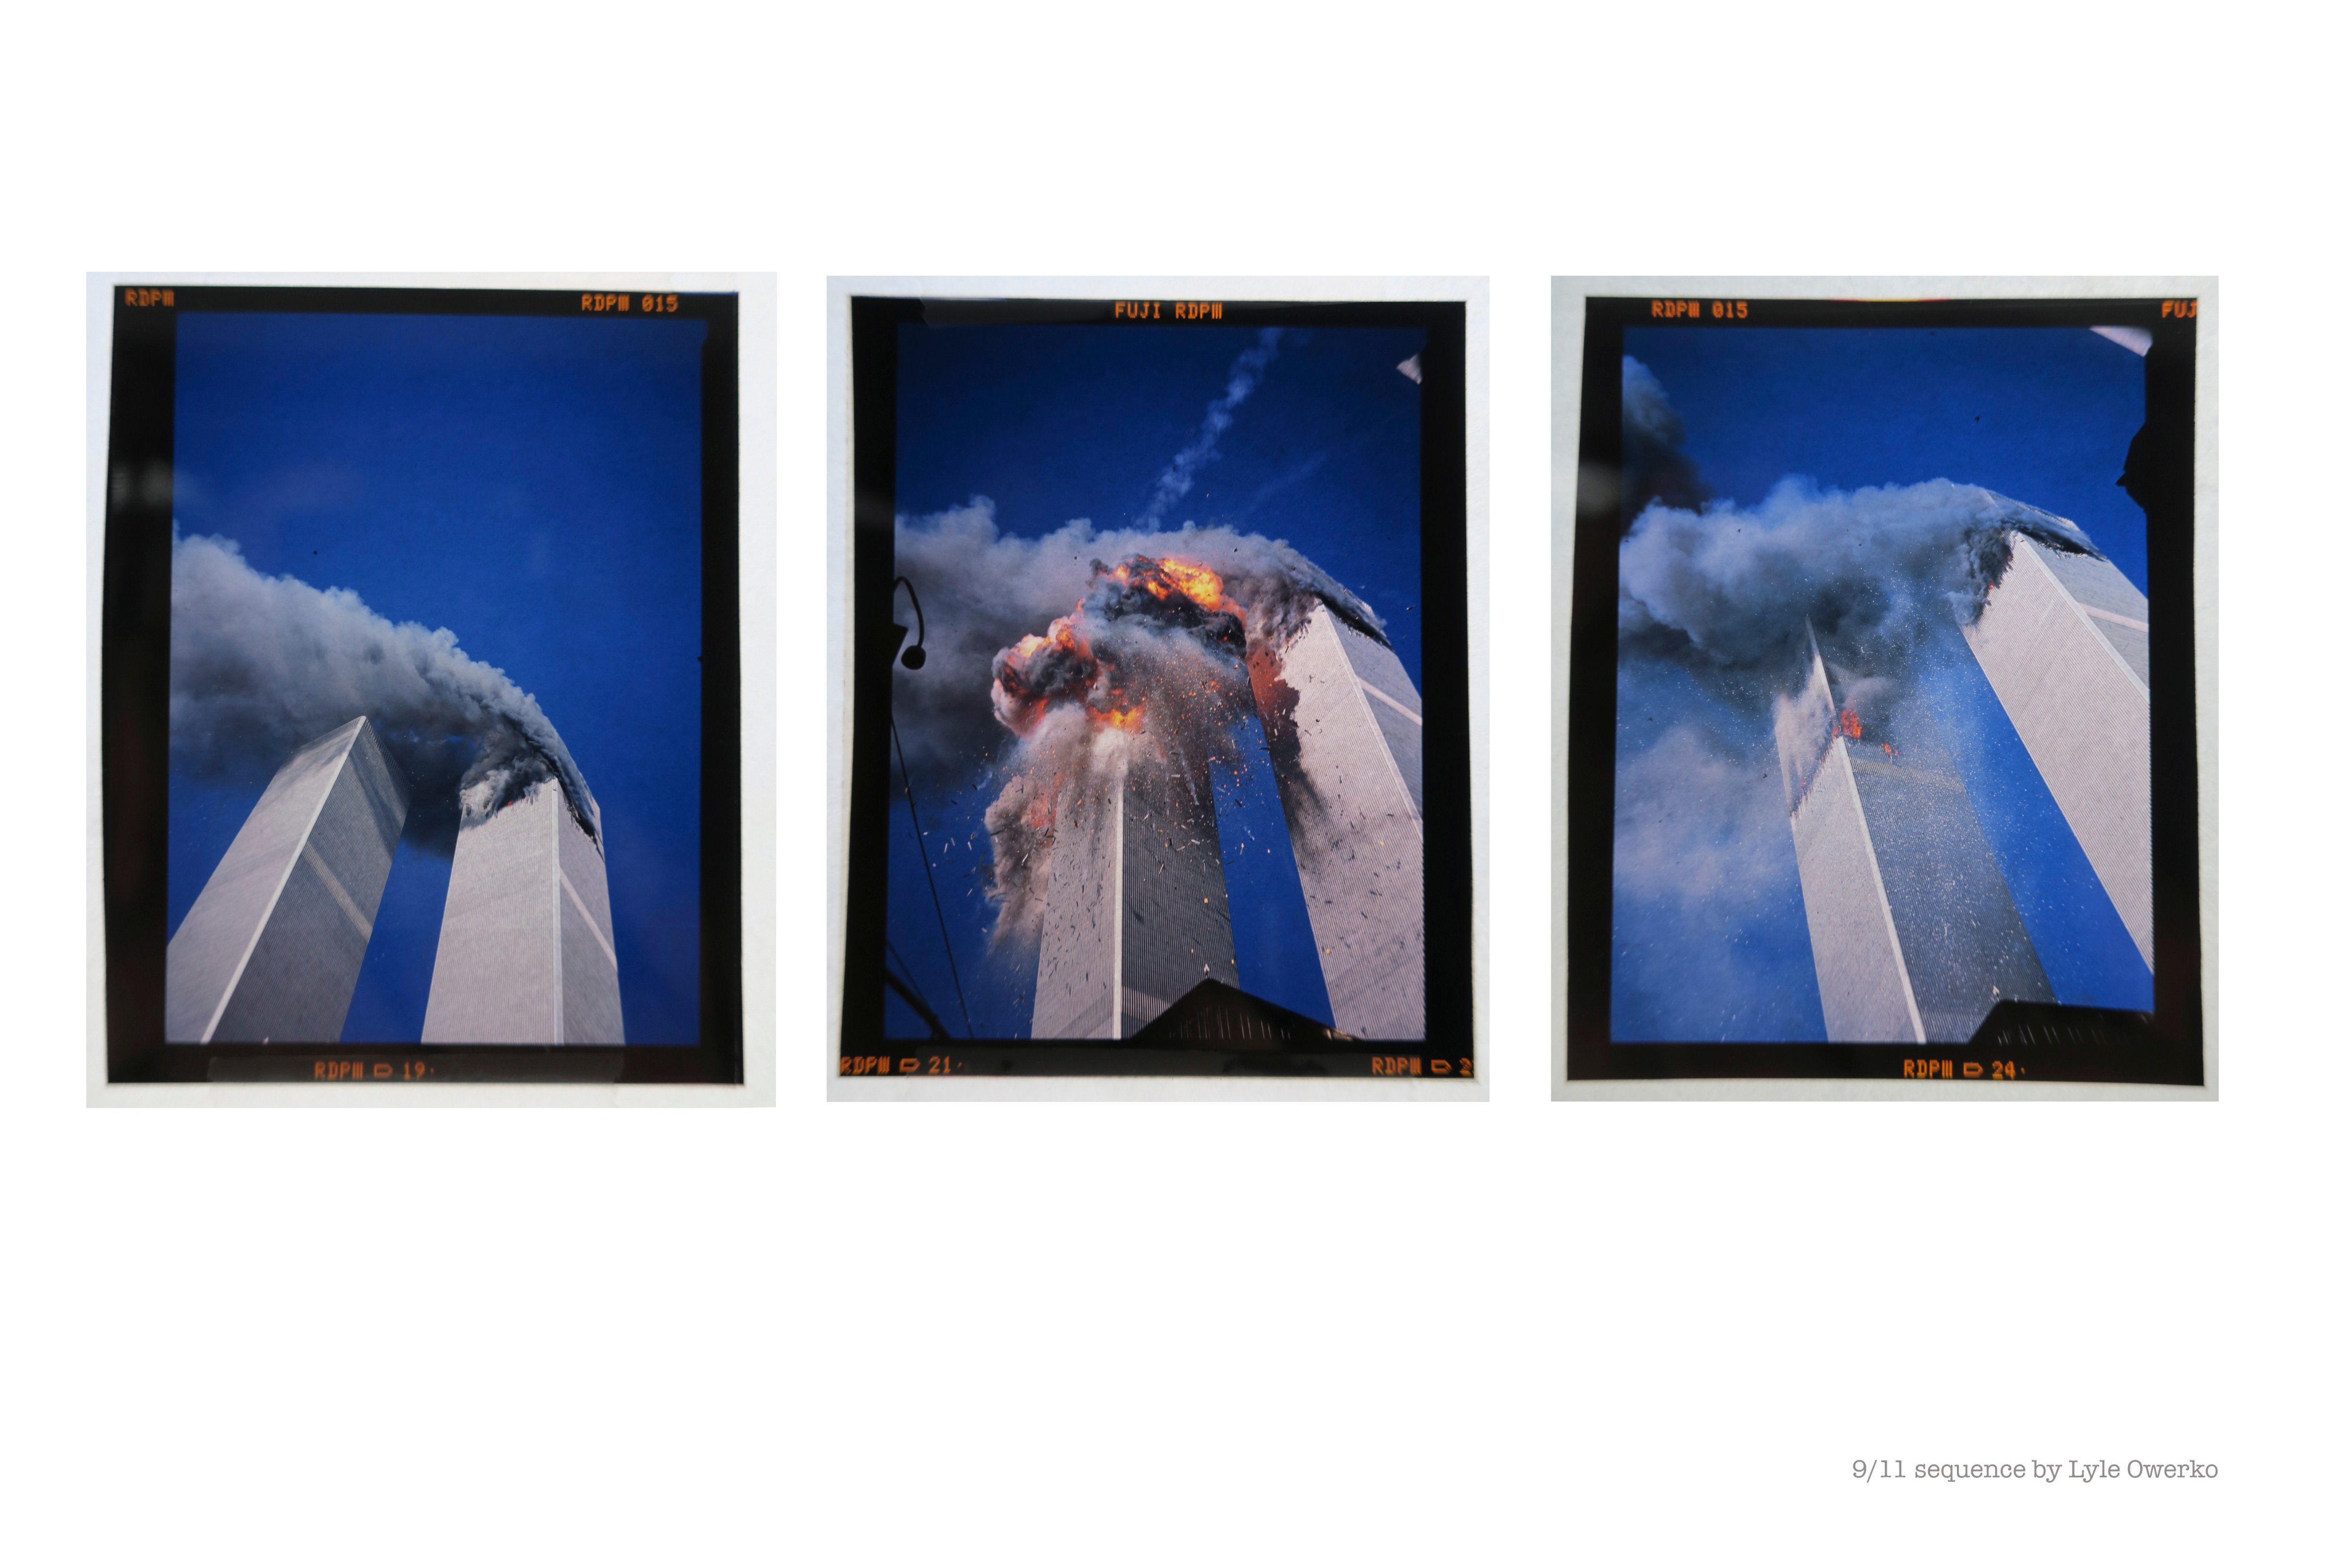 Three consecutive frames of the World Trade Center on the morning of 9/11 shot by photographer Lyle Owerko. (Lyle Owerko)